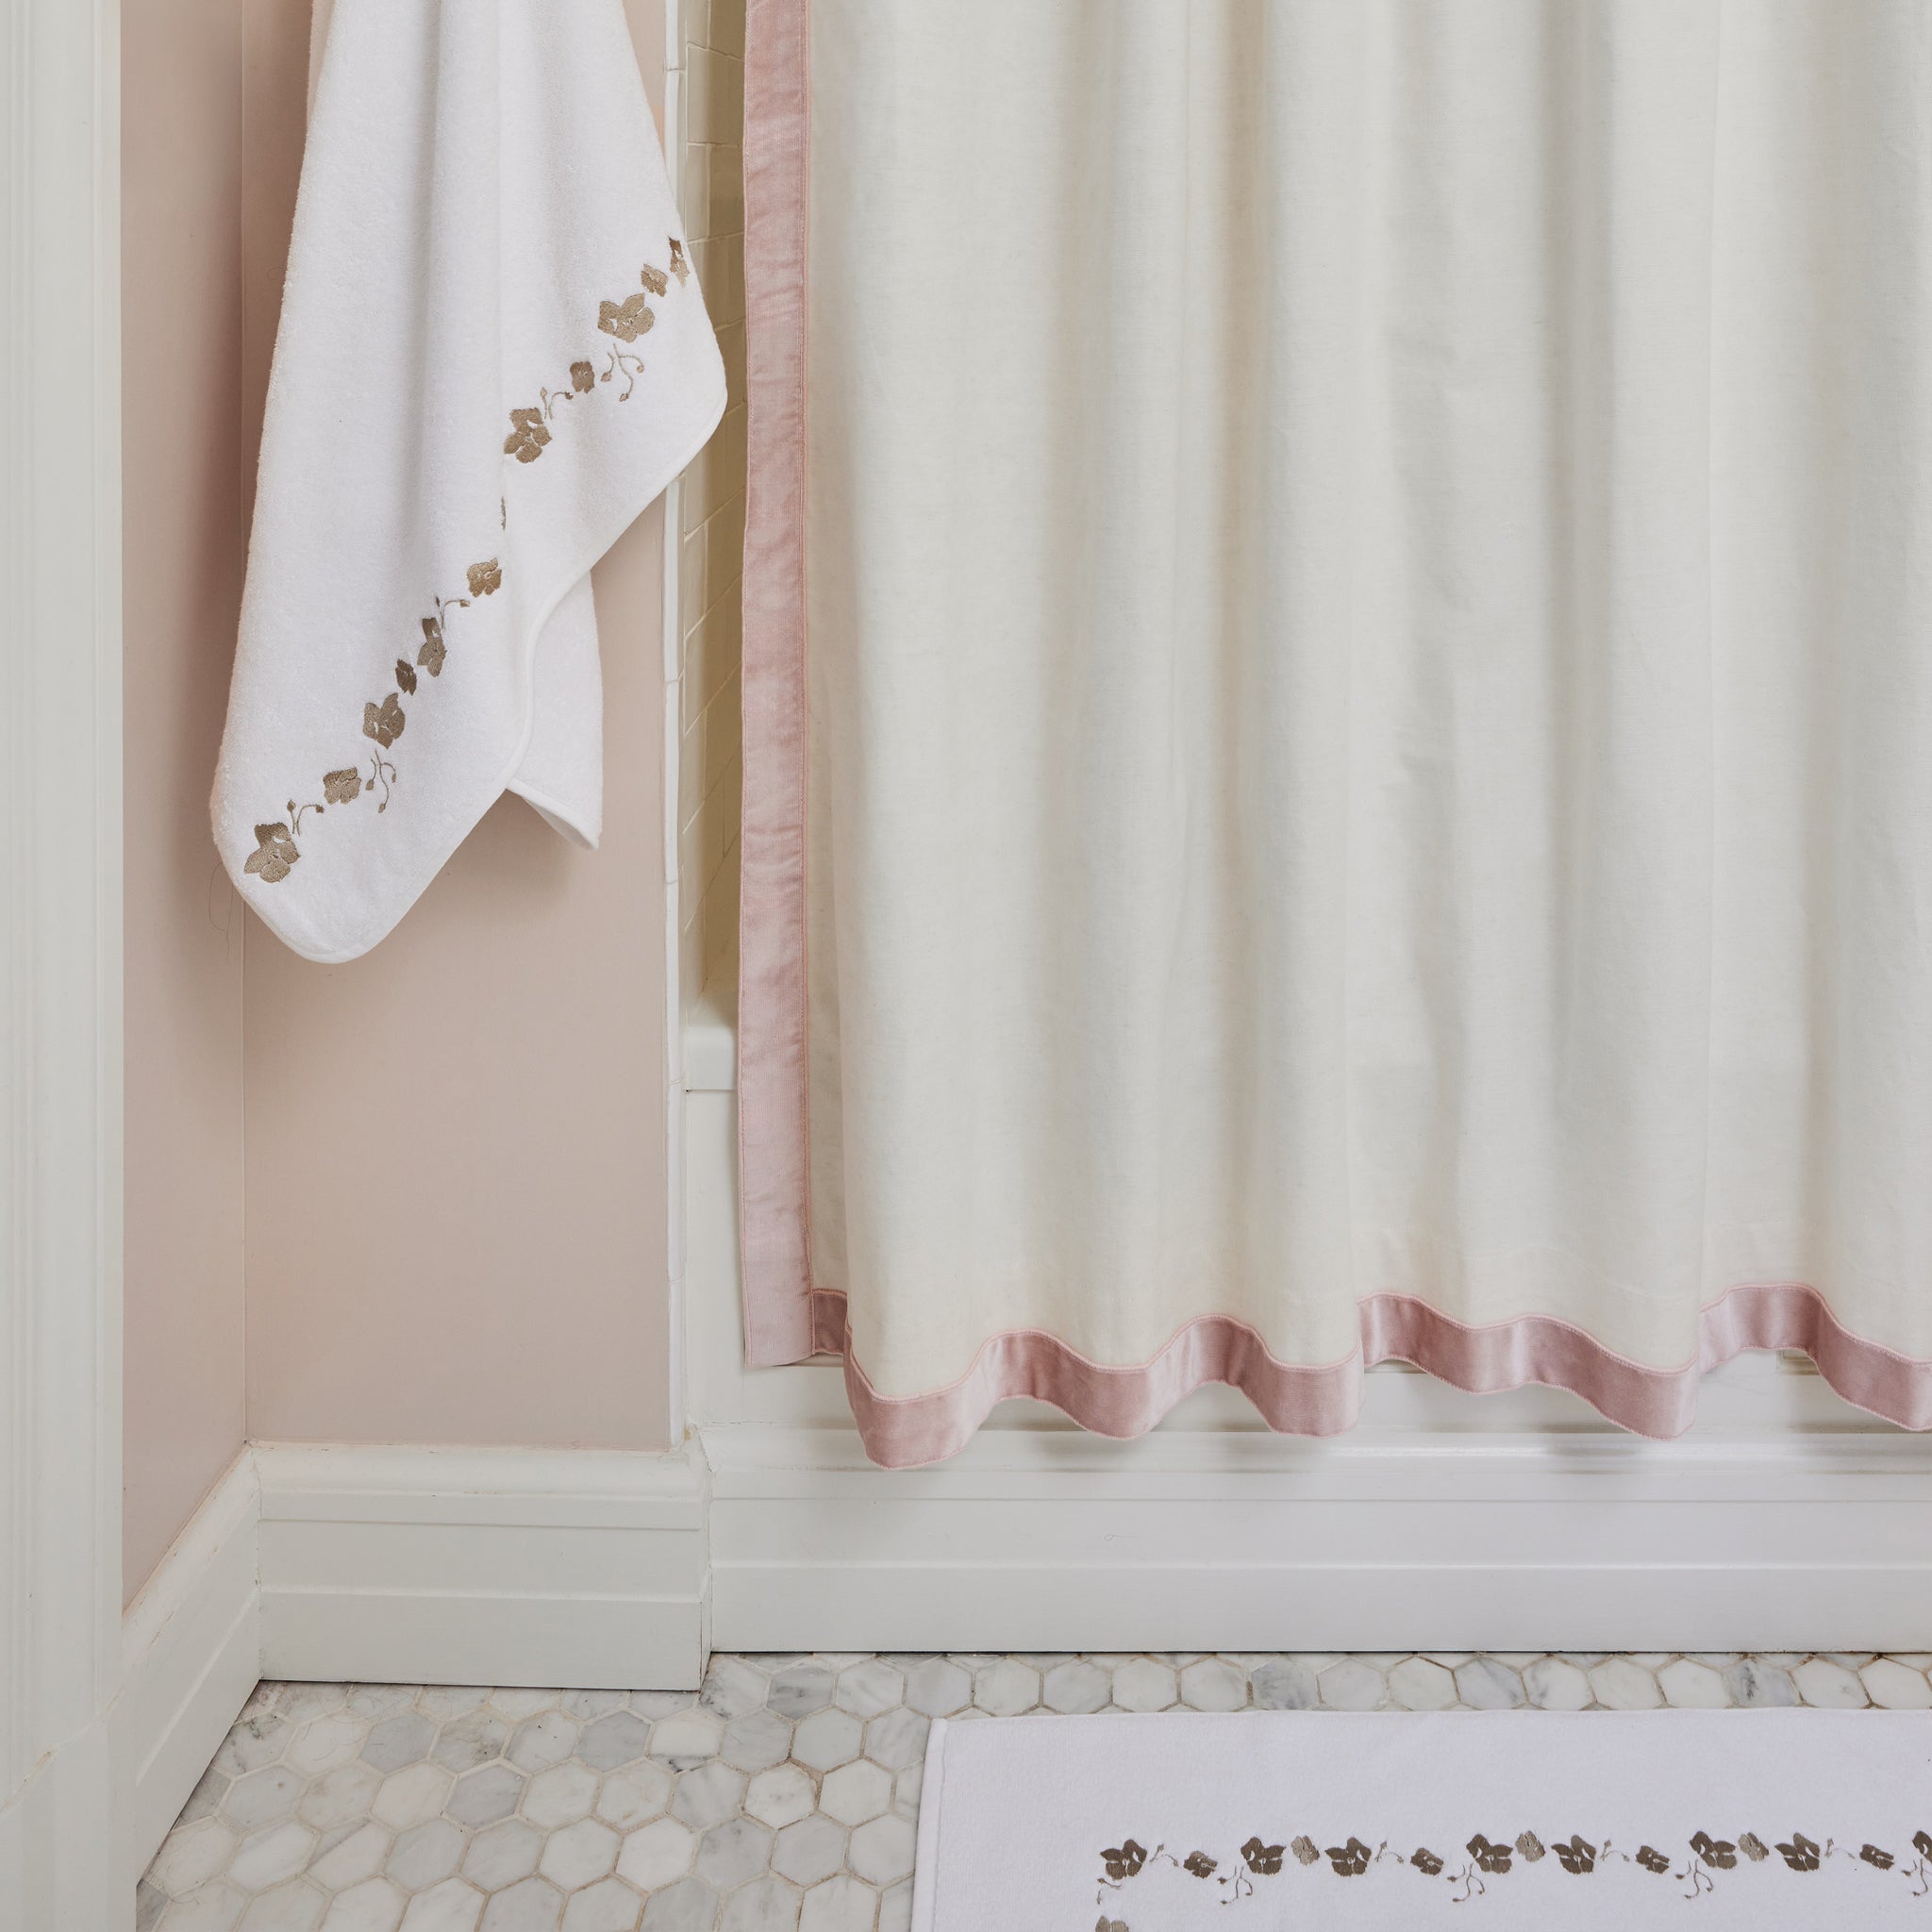 white towel with sand colored embroidered botanical stripe hung next to a shower bath with a white shower curtain with a pink velvet band trim